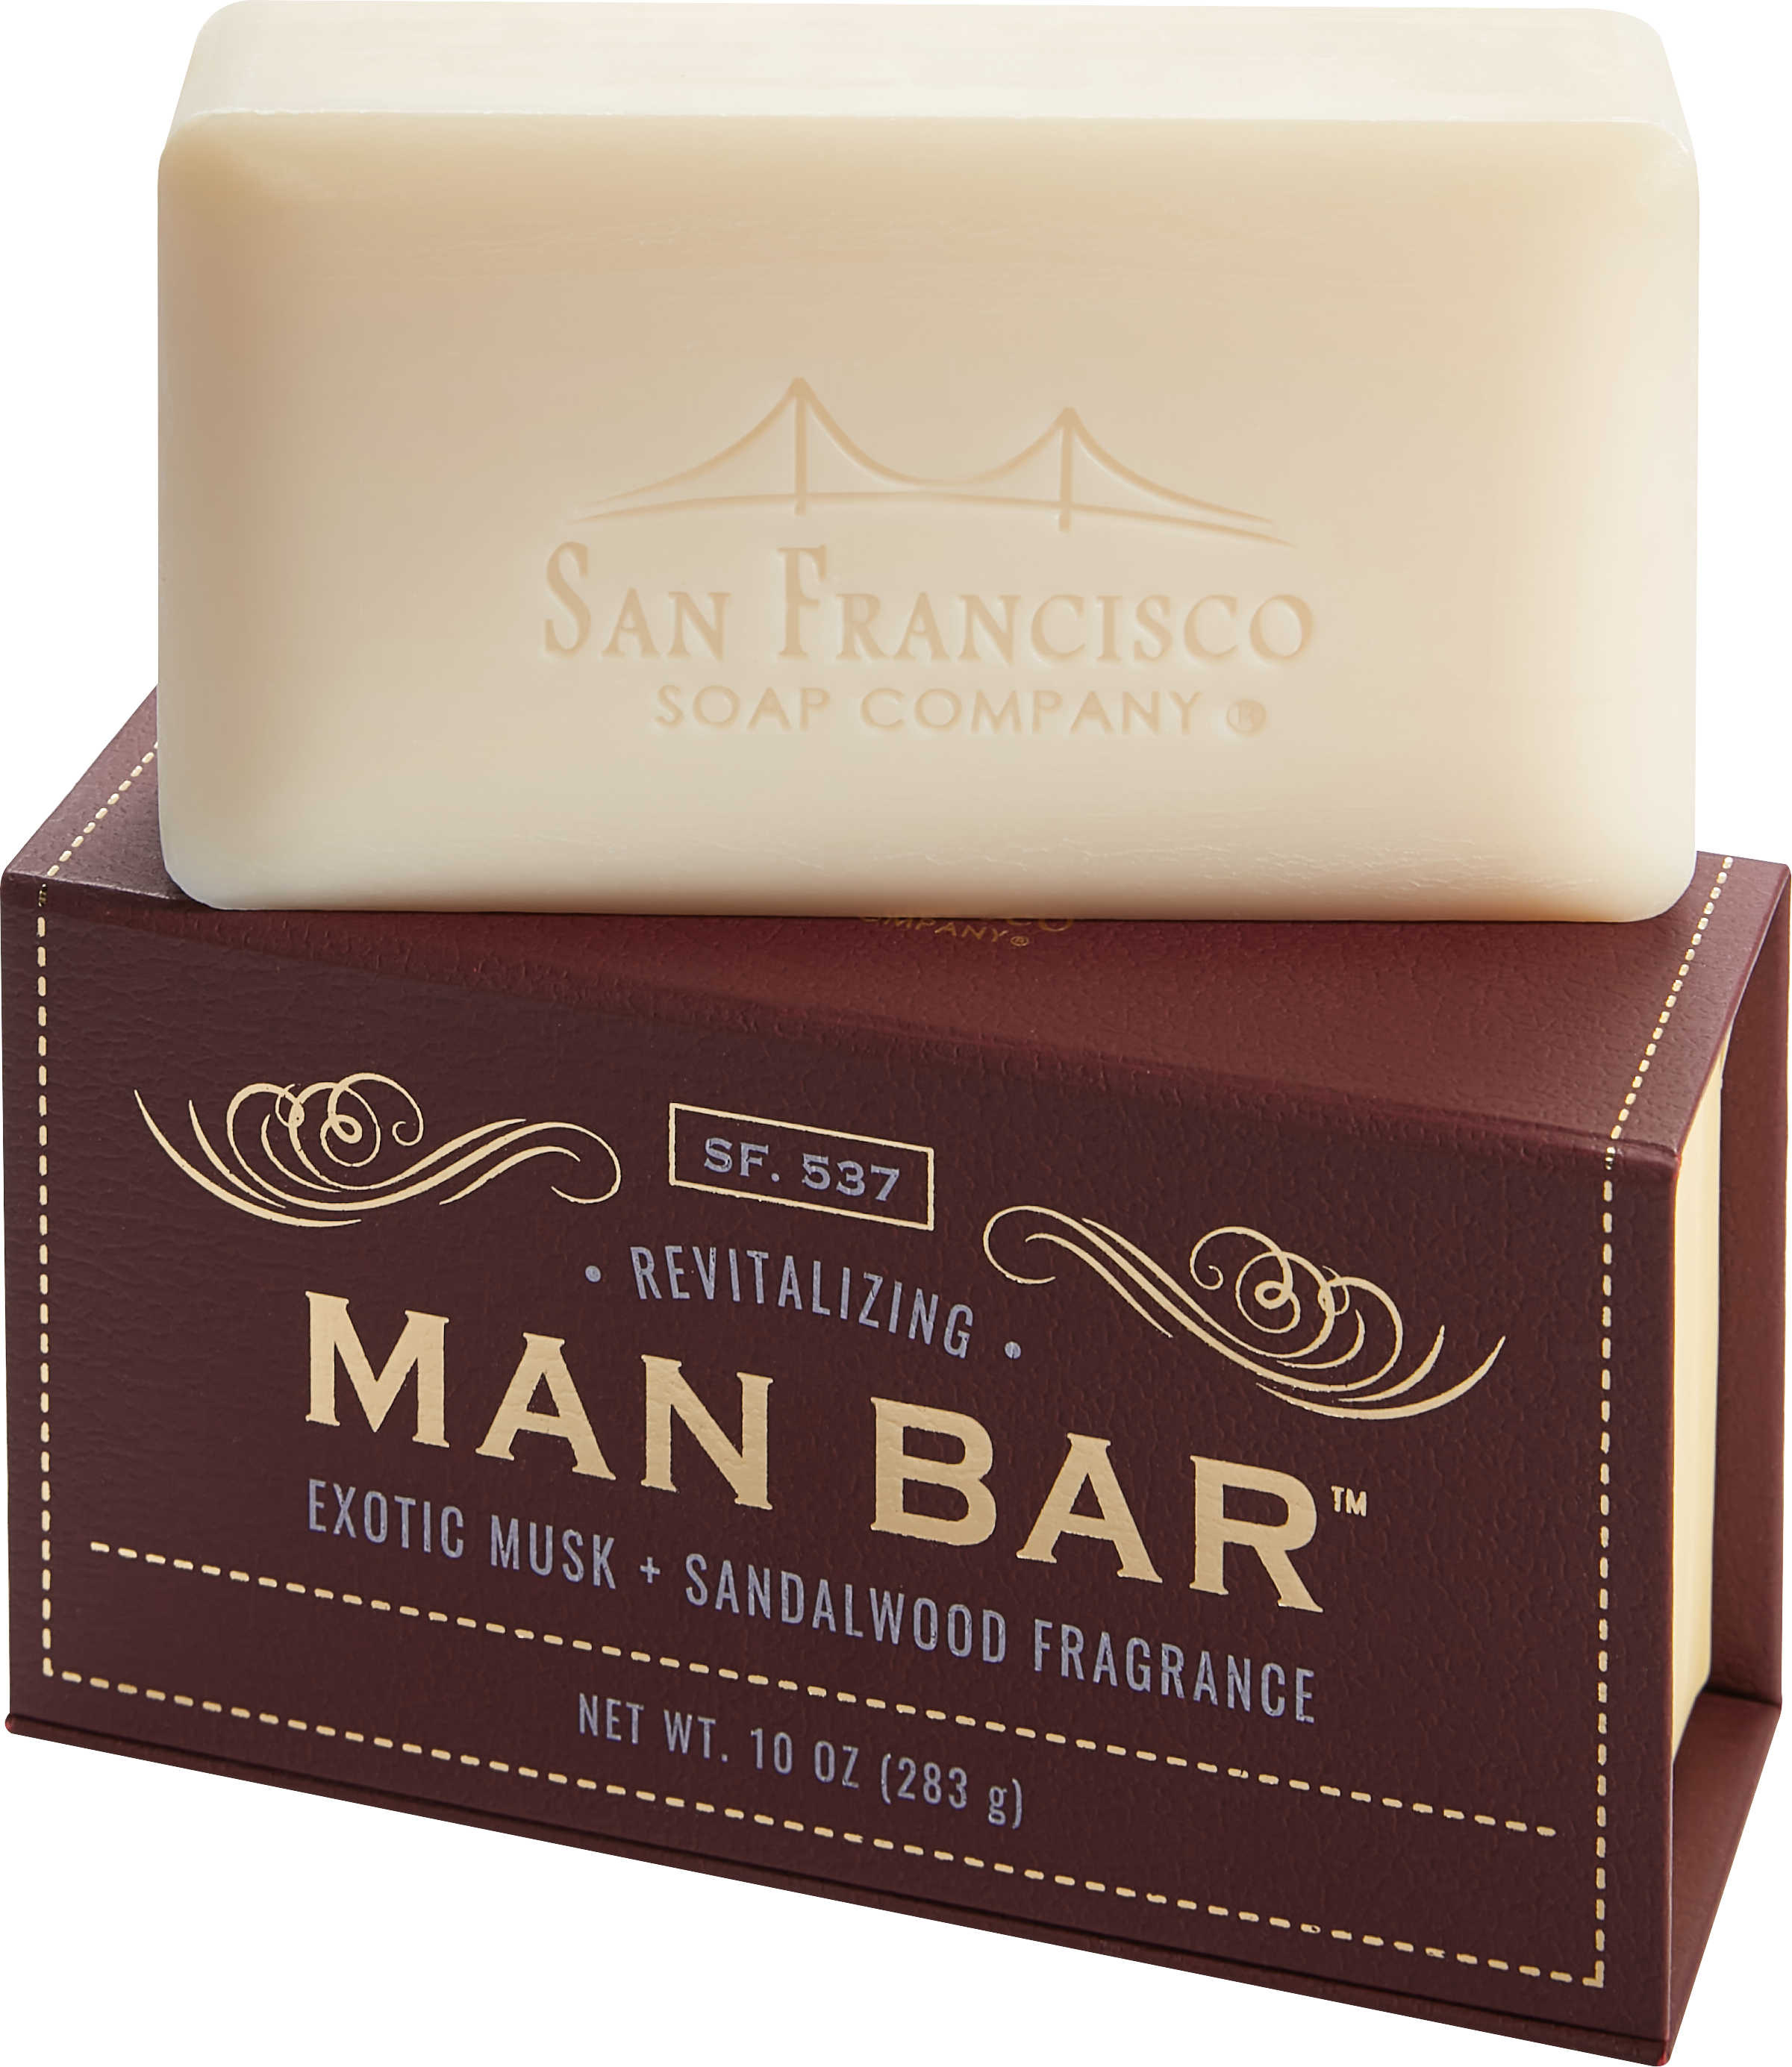 https://image.menswearhouse.com/is/image/TMW/TMW_8X8D_00_SAN_FRANCISCO_SOAP_CO_SKIN_BODY_CARE_MUSK_SOAP_MAIN